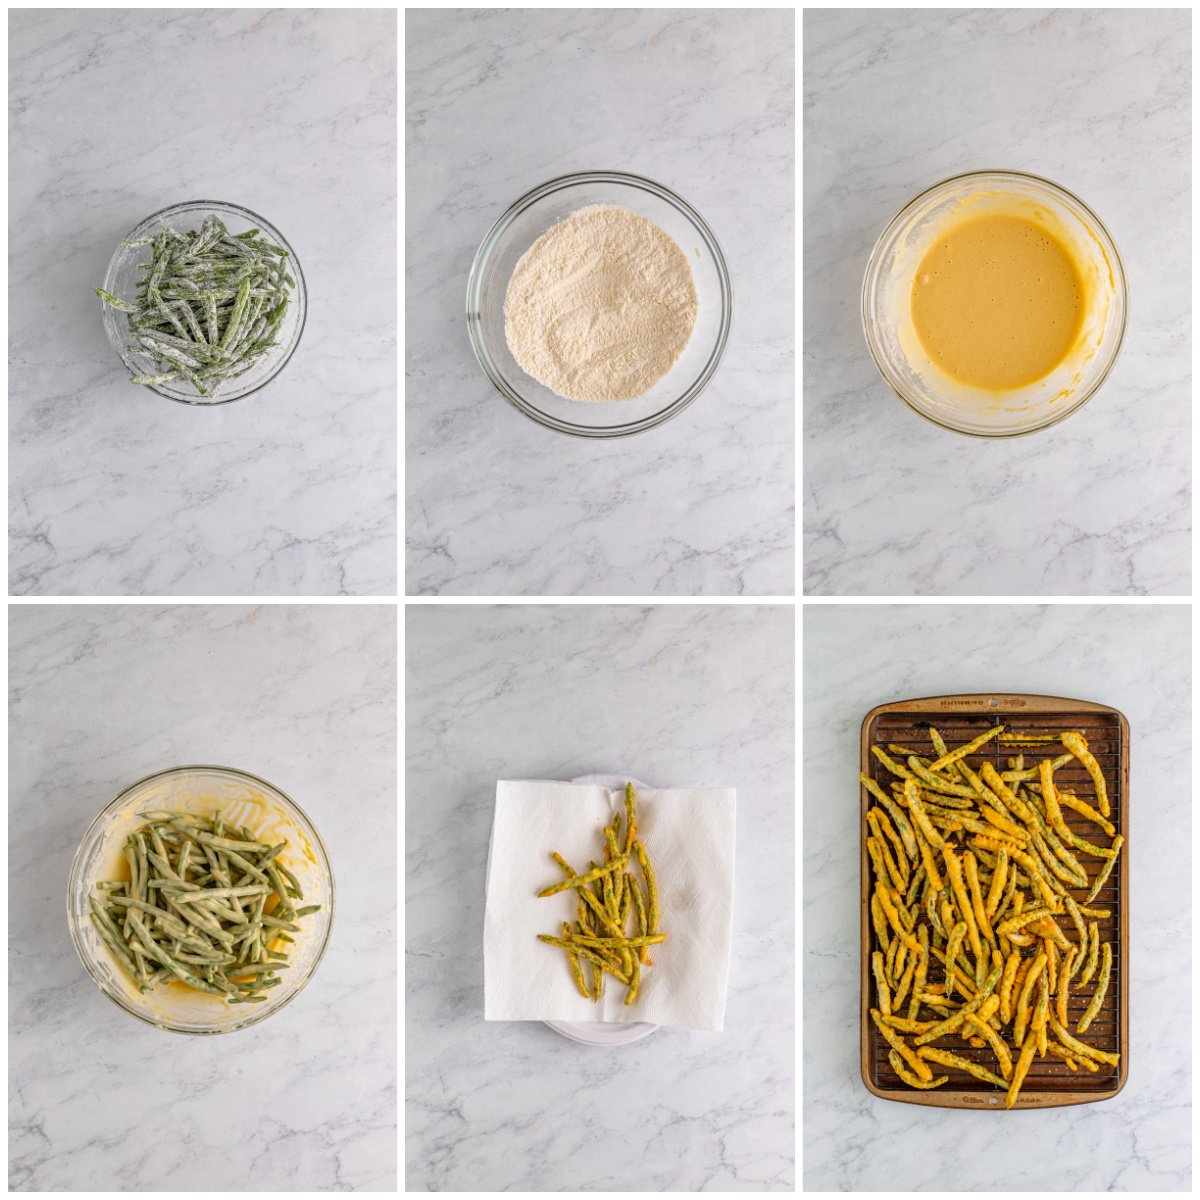 Step by step photos on how to make Fried Green Beans